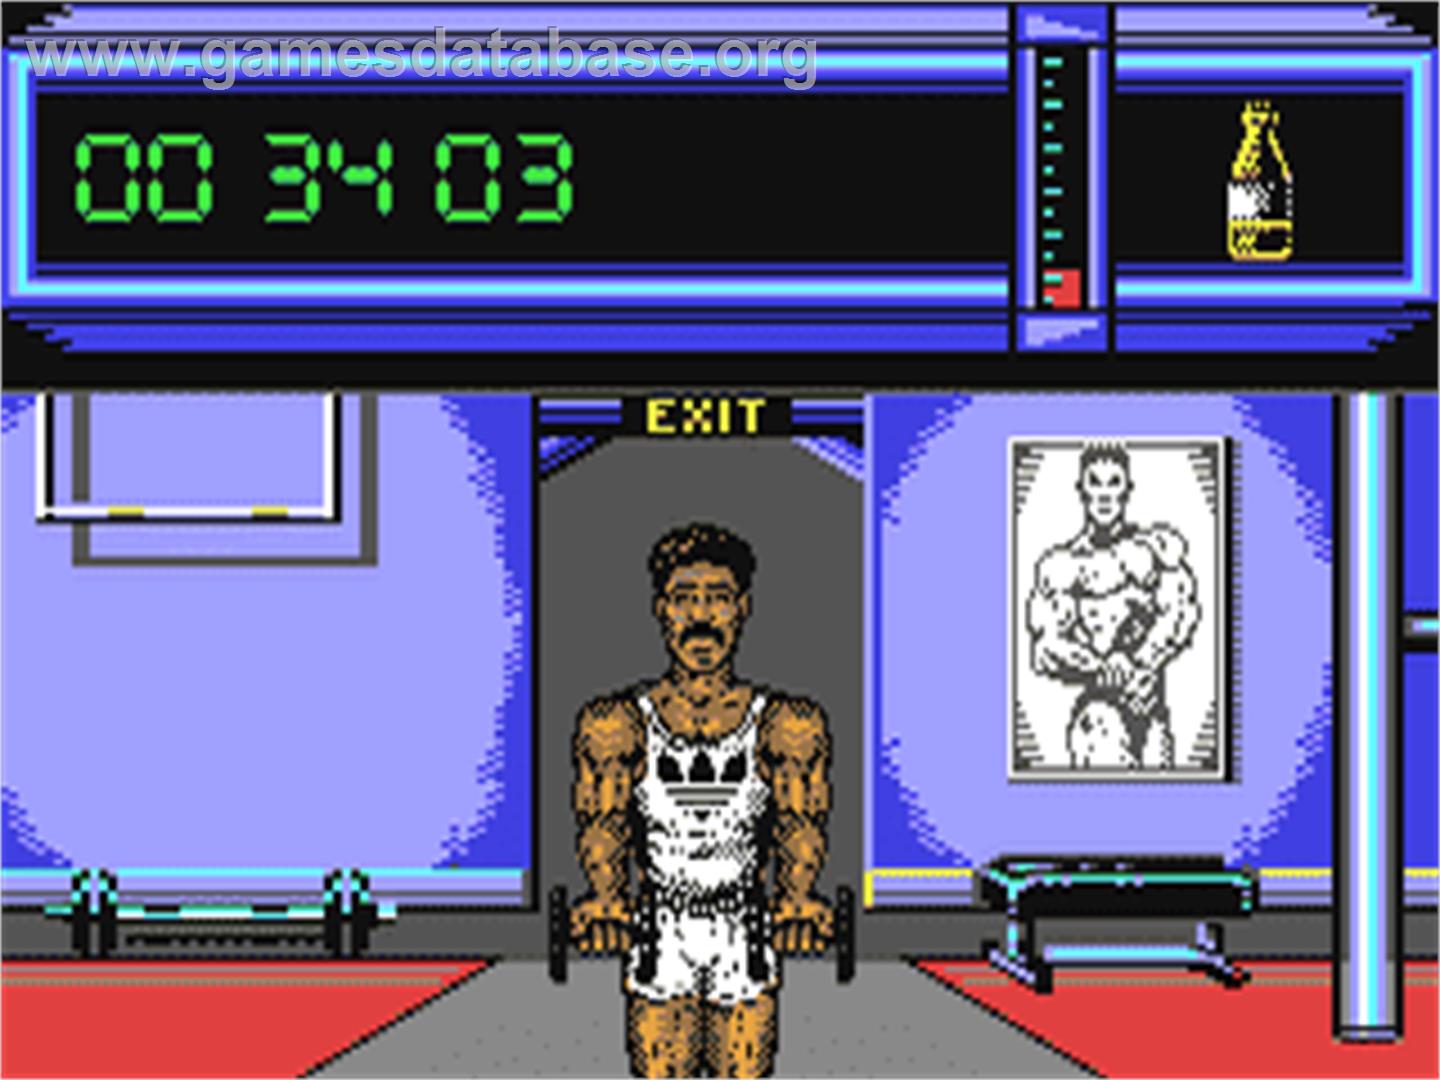 Daley Thompson's Olympic Challenge - Commodore 64 - Artwork - In Game